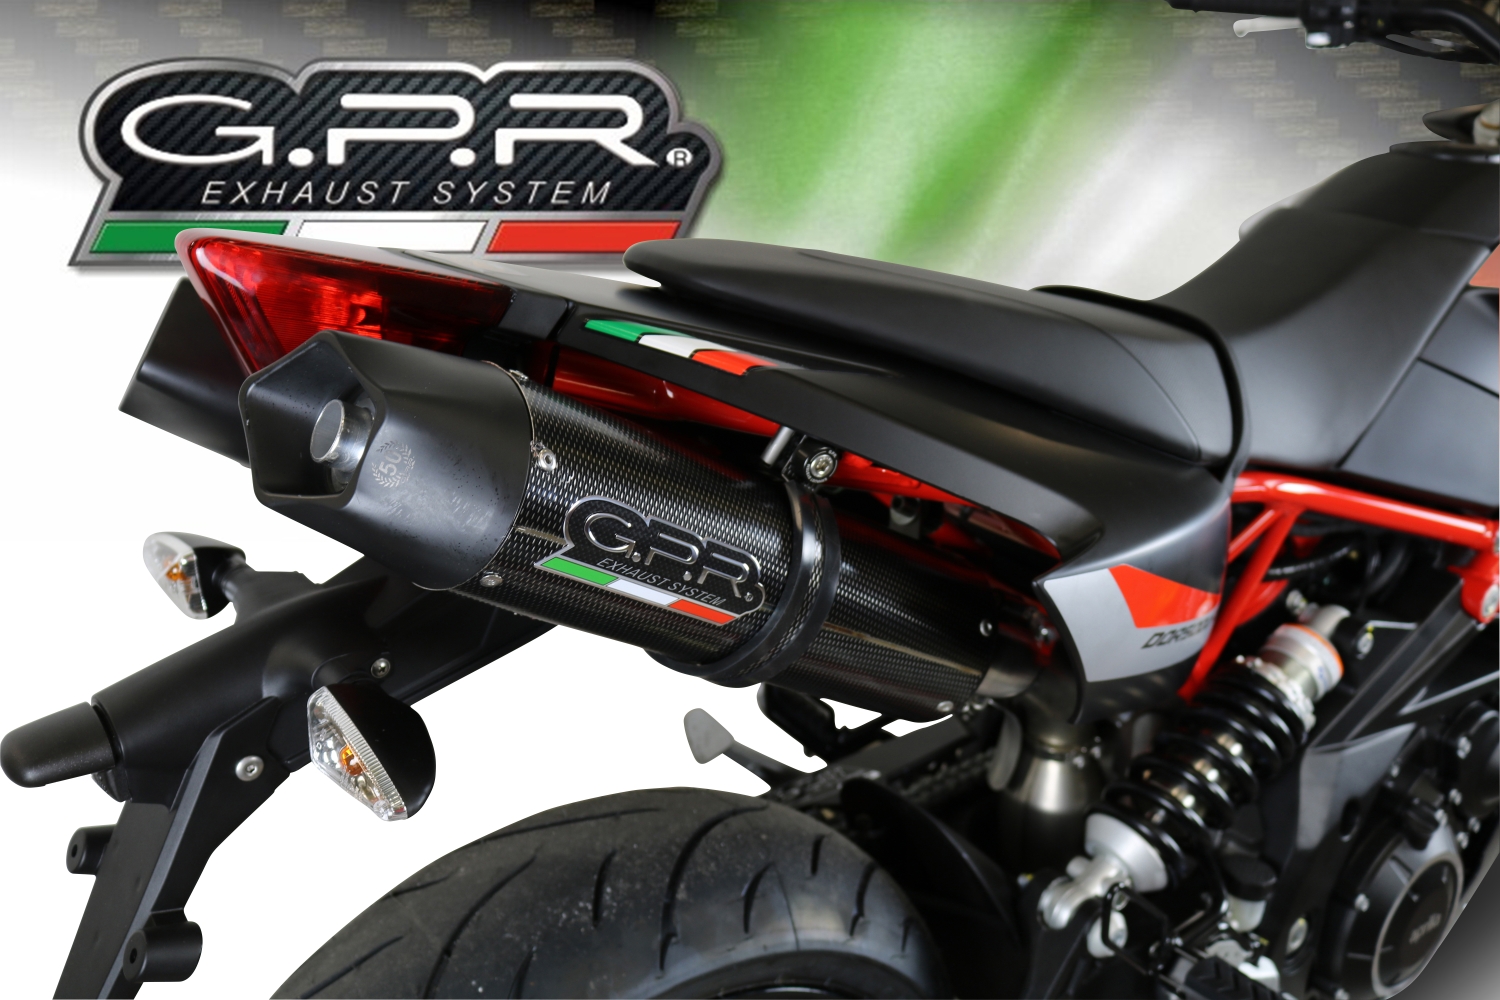 Exhaust system compatible with Aprilia Dorsoduro 750 2008-2016, Gpe Ann. Poppy, Dual Homologated legal slip-on exhaust including removable db killers and link pipes 